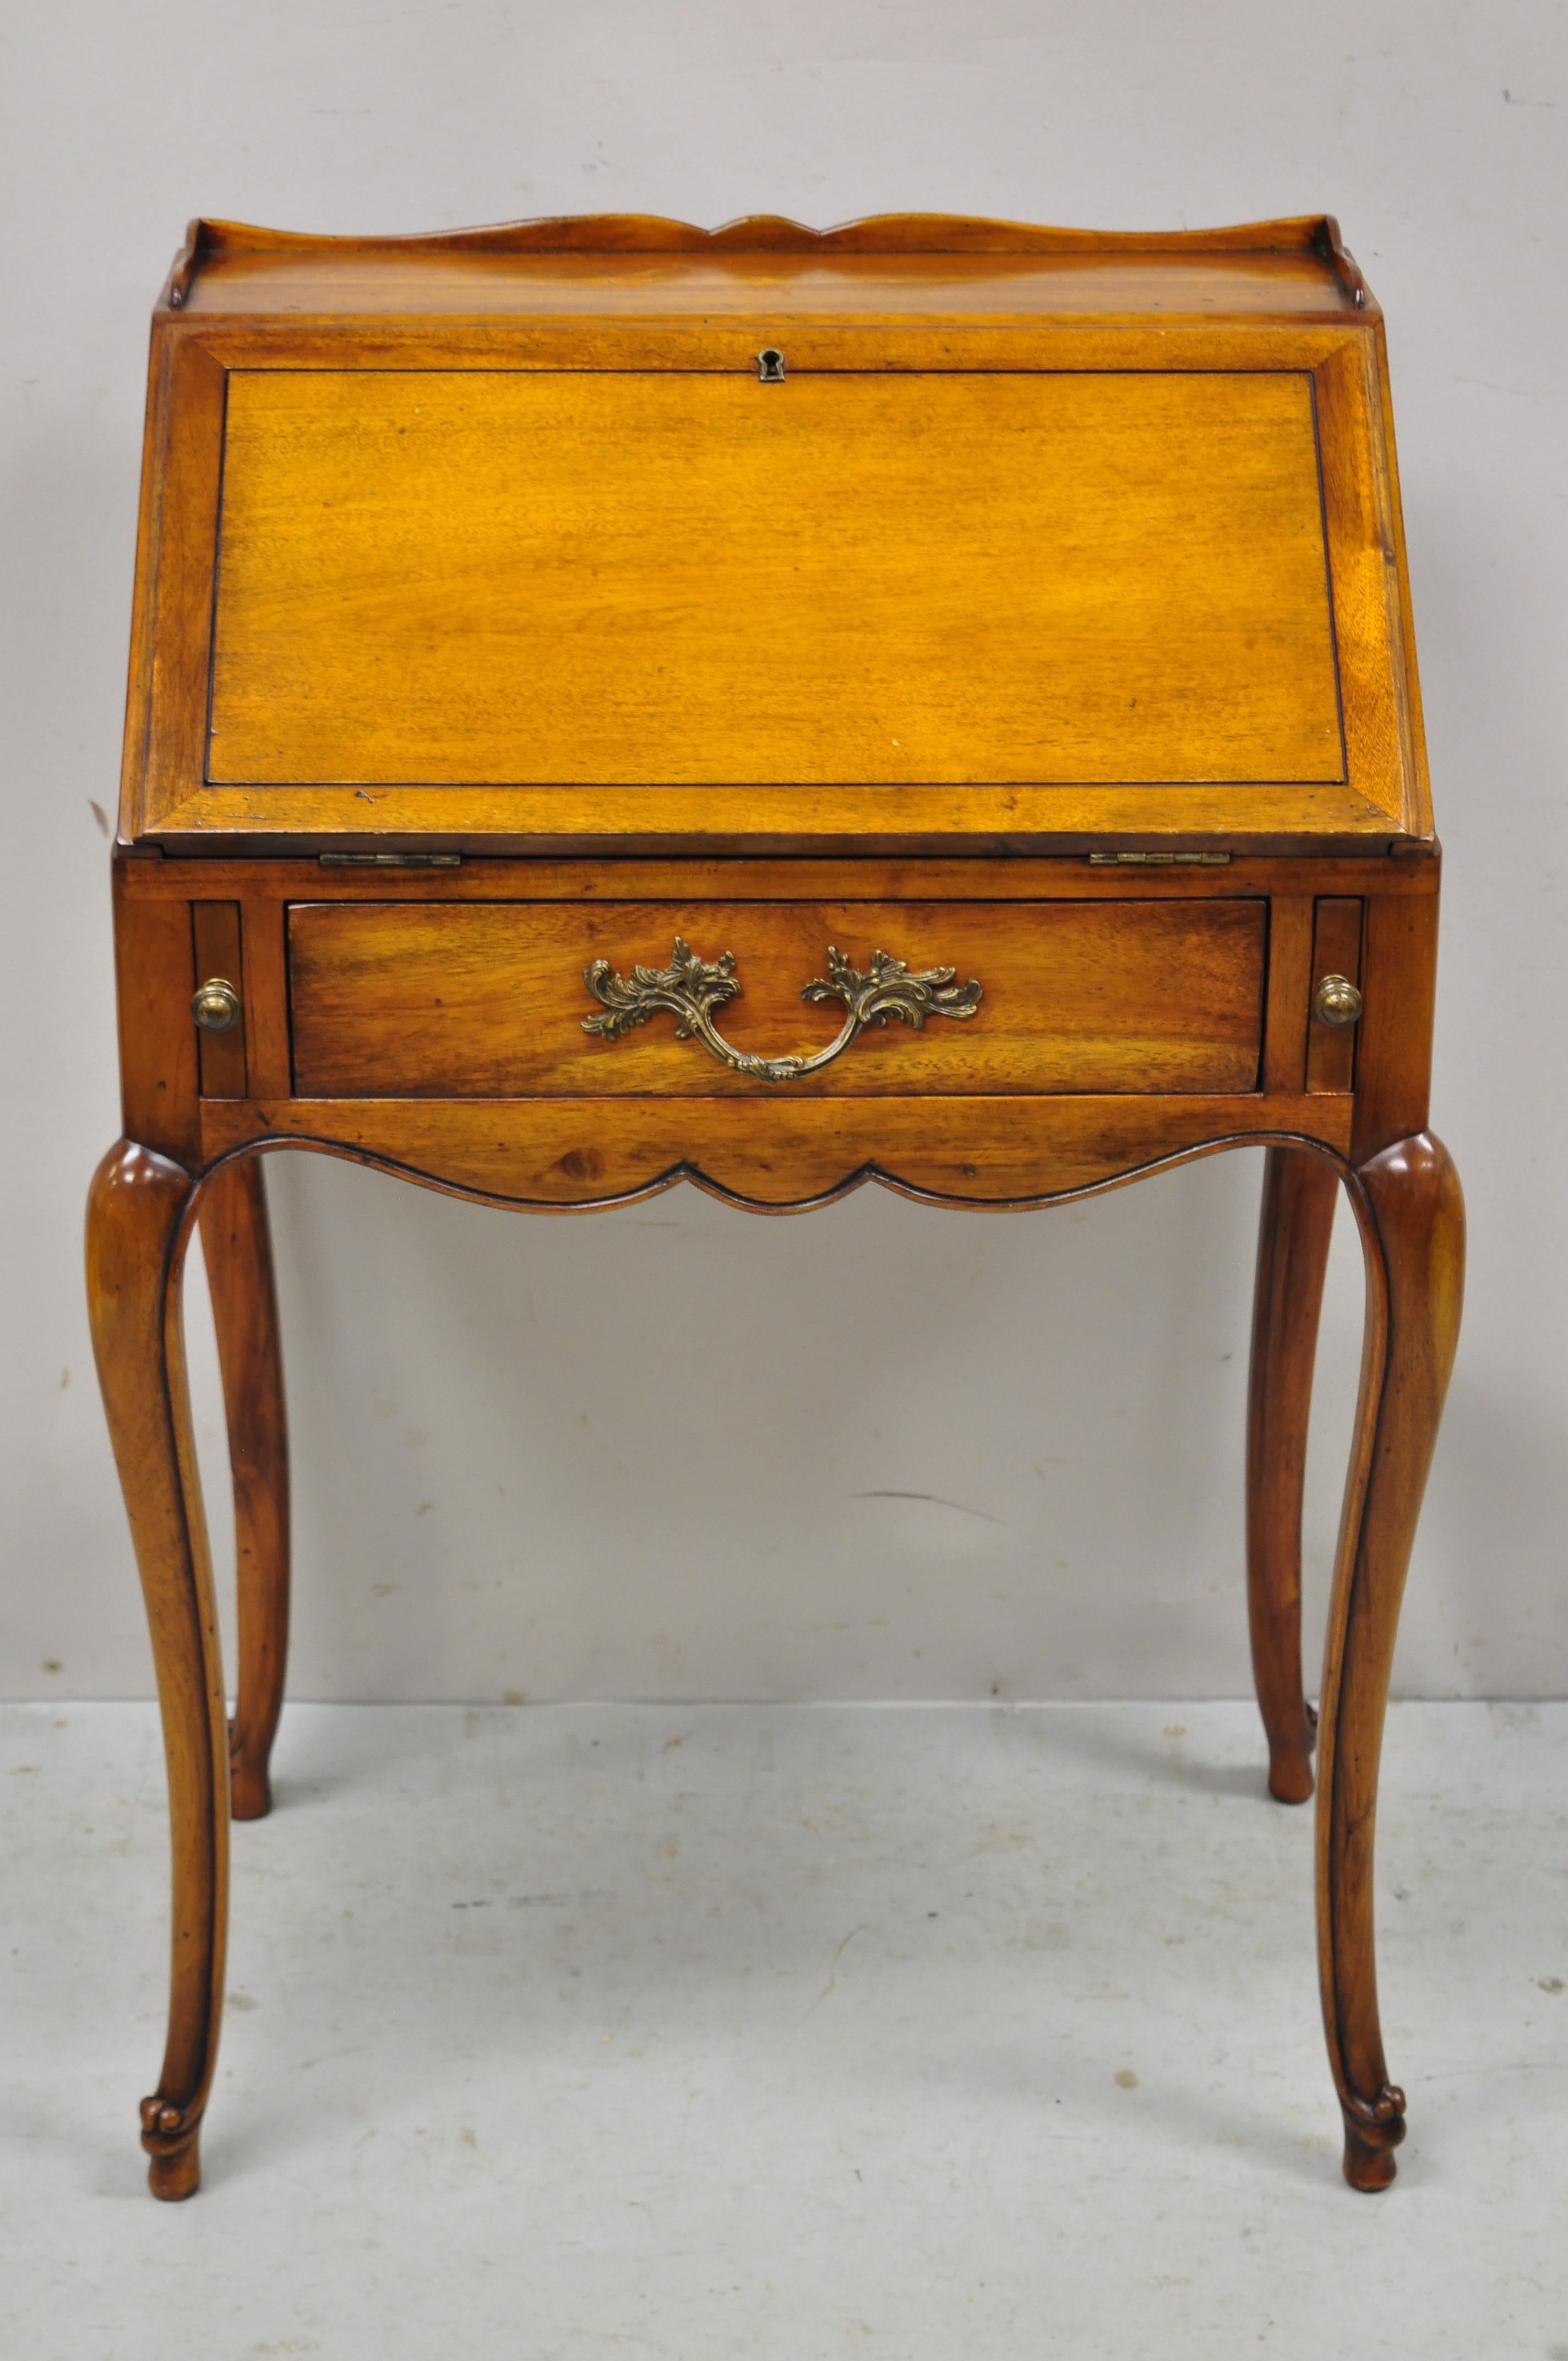 French Provincial style cherry wood fall front small secretary desk attributed to Theodore Alexander. Item features fall front with tooled leather writing surface, fitted interior with drawers, solid wood construction, beautiful wood grain,